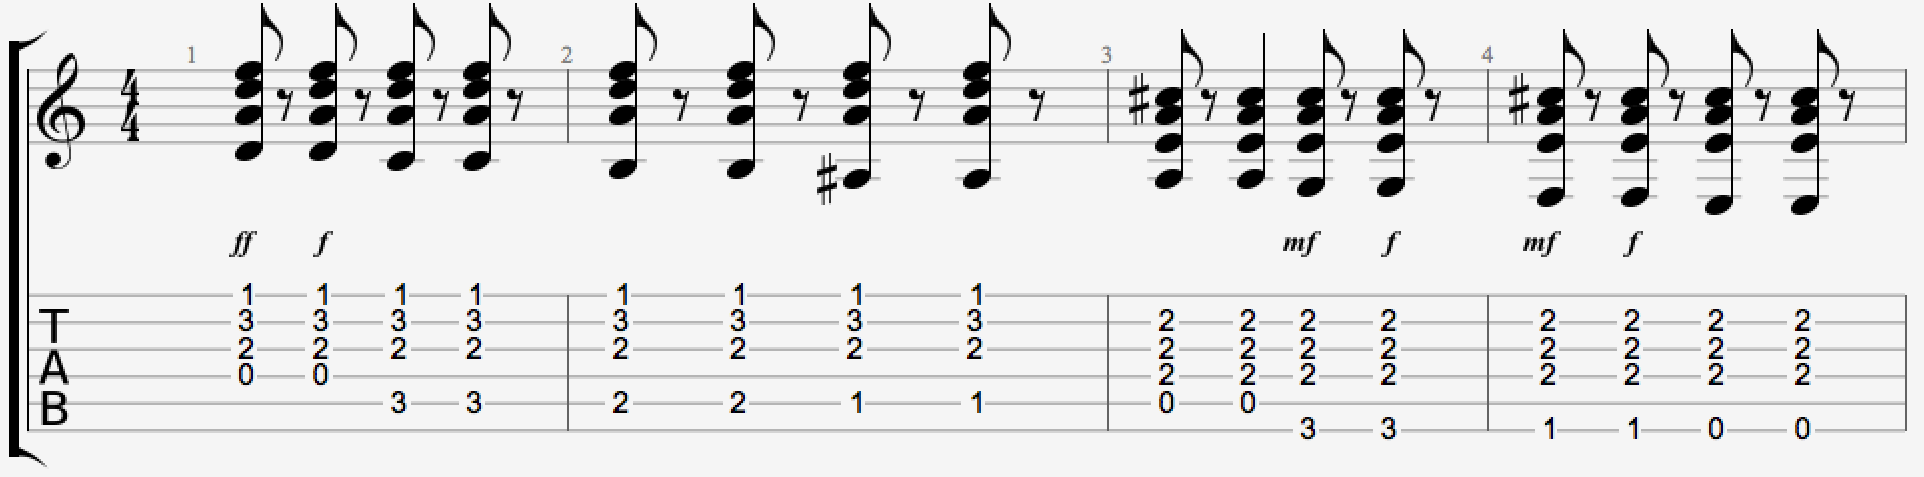 The intro to Sunny Afternoon with chords. You could of course also just play the bass lline on the low E string, without the chords